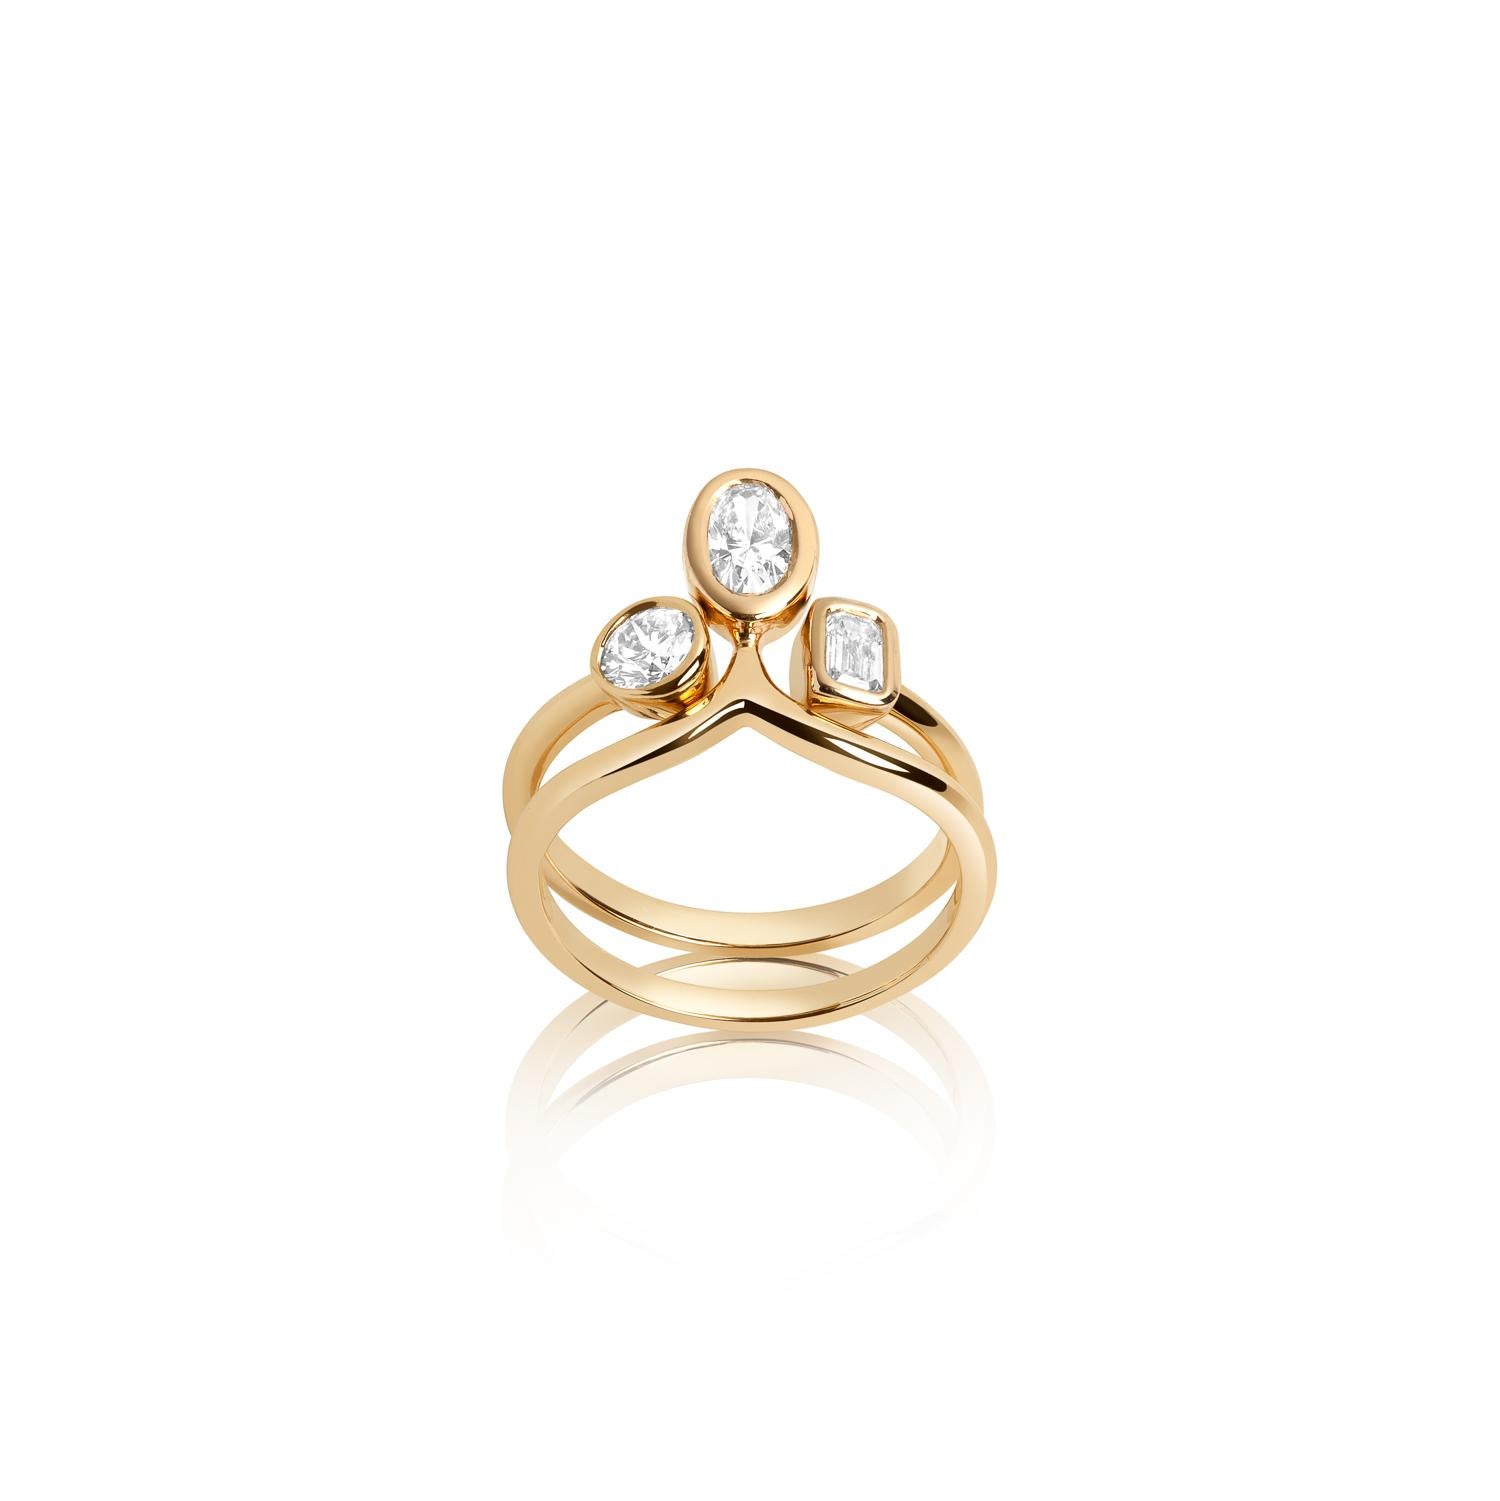 This stackable ring set consists of two rings that fit nestled perfectly together. It can be worn together or separately. 

Inspired by seeing the cross-section view of life, as if slicing a tree to see its underlying structure and raw beauty, Hi